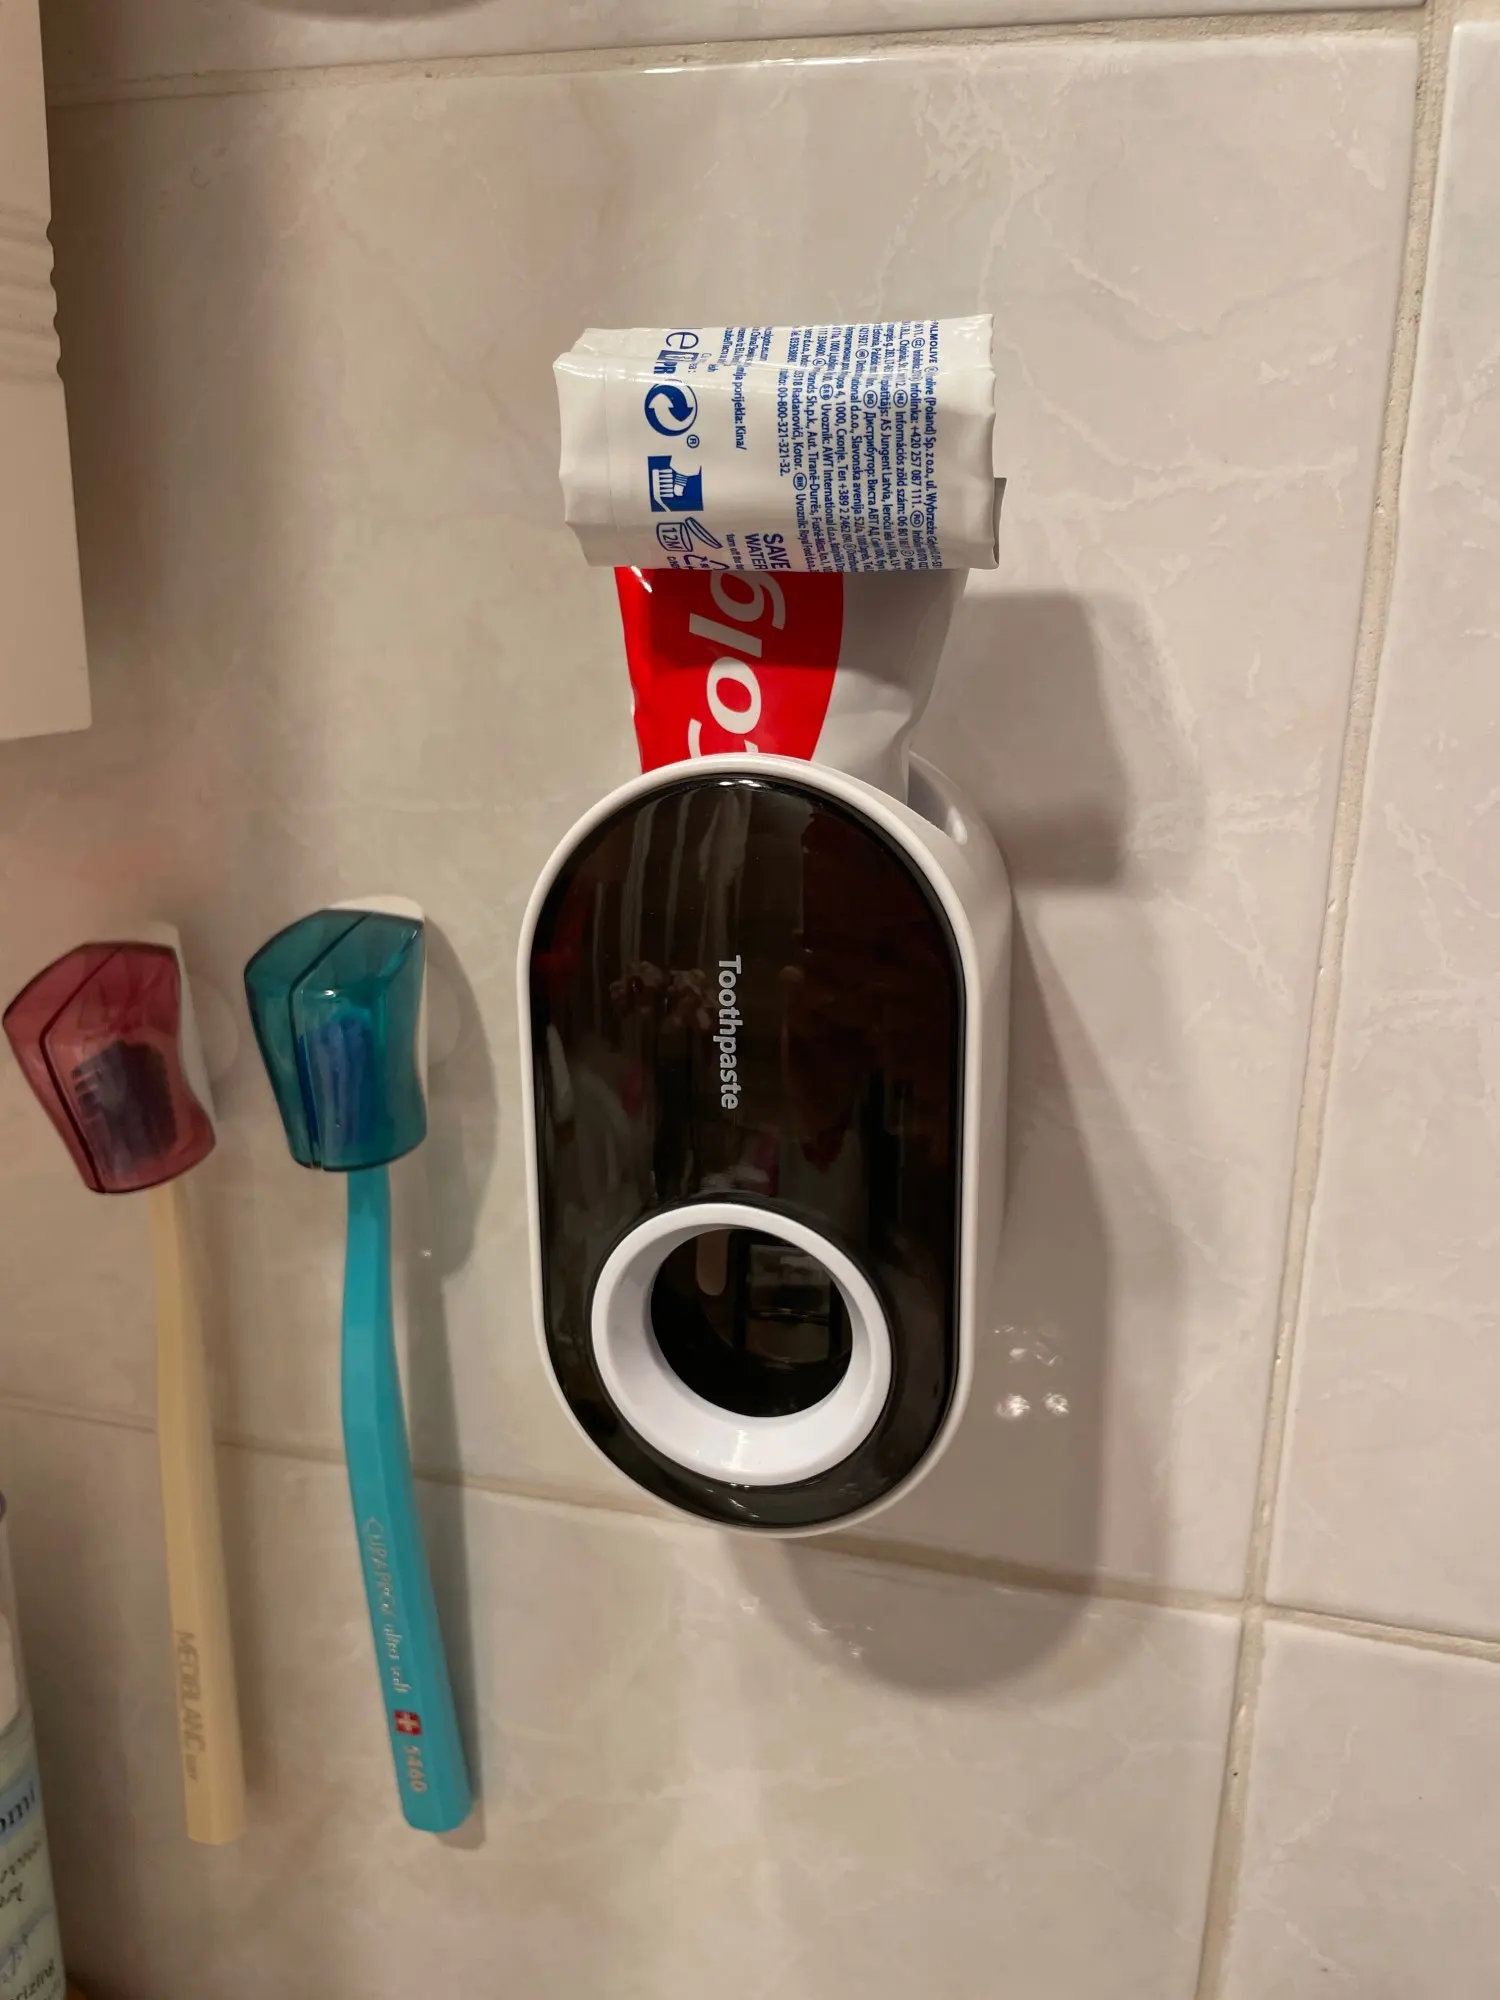 Automatic Toothpaste Dispenser Wall-Mounted photo review